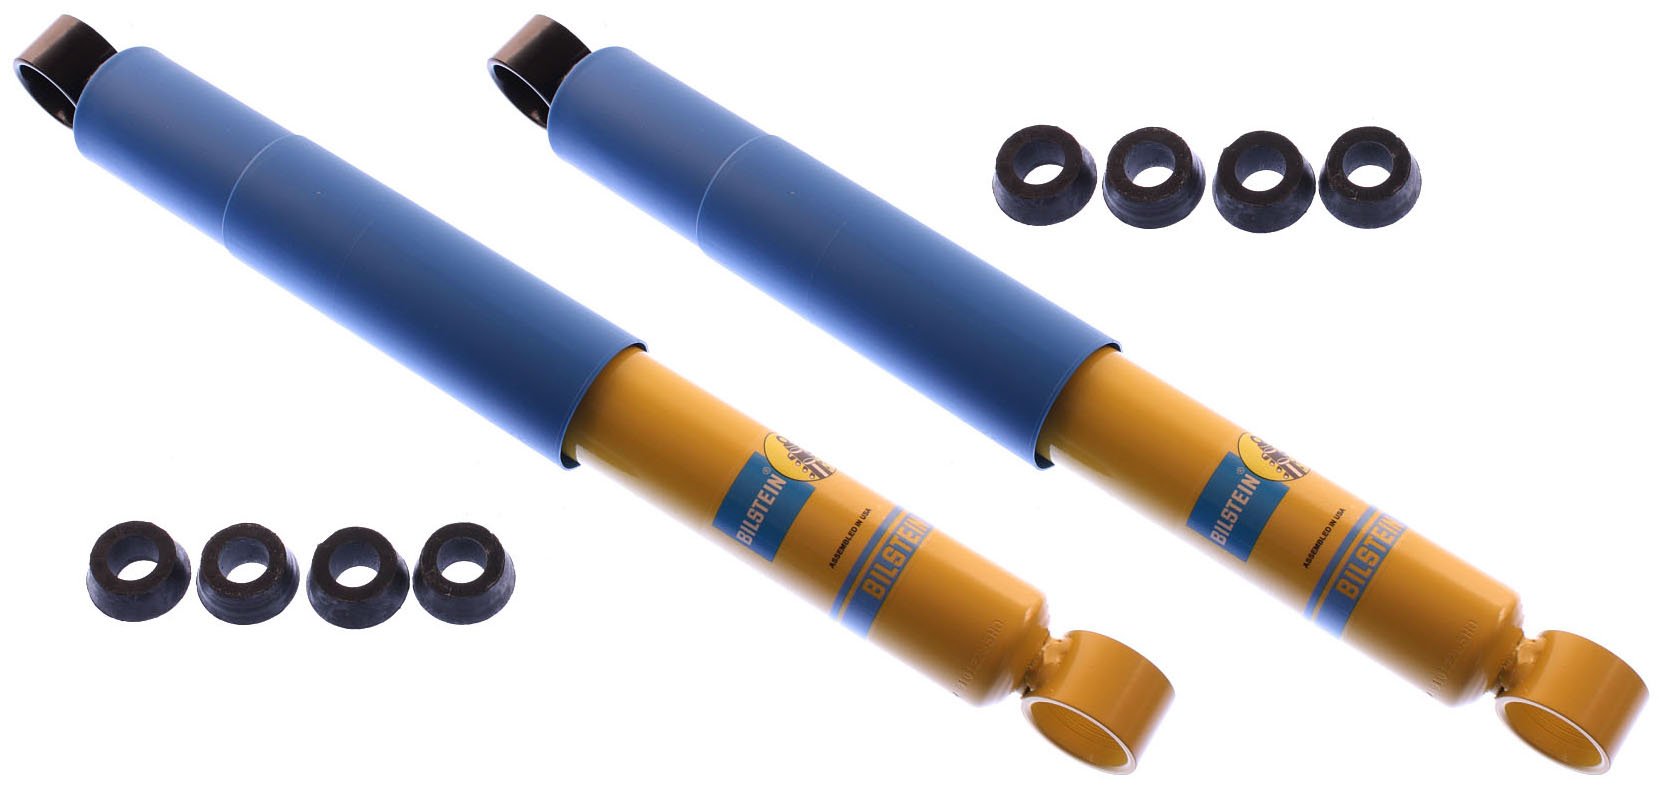 NEW BILSTEIN FRONT & REAR SHOCKS FOR 98-04 TOYOTA TACOMA PRERUNNER & 95-04 TACOMA 4WD BASE SR5 DLX LIMITED, 4600 SERIES 46MM SHOCK ABSORBERS, 1995 1996 1997 1998 1999 2000 2001 2002 2003 2004